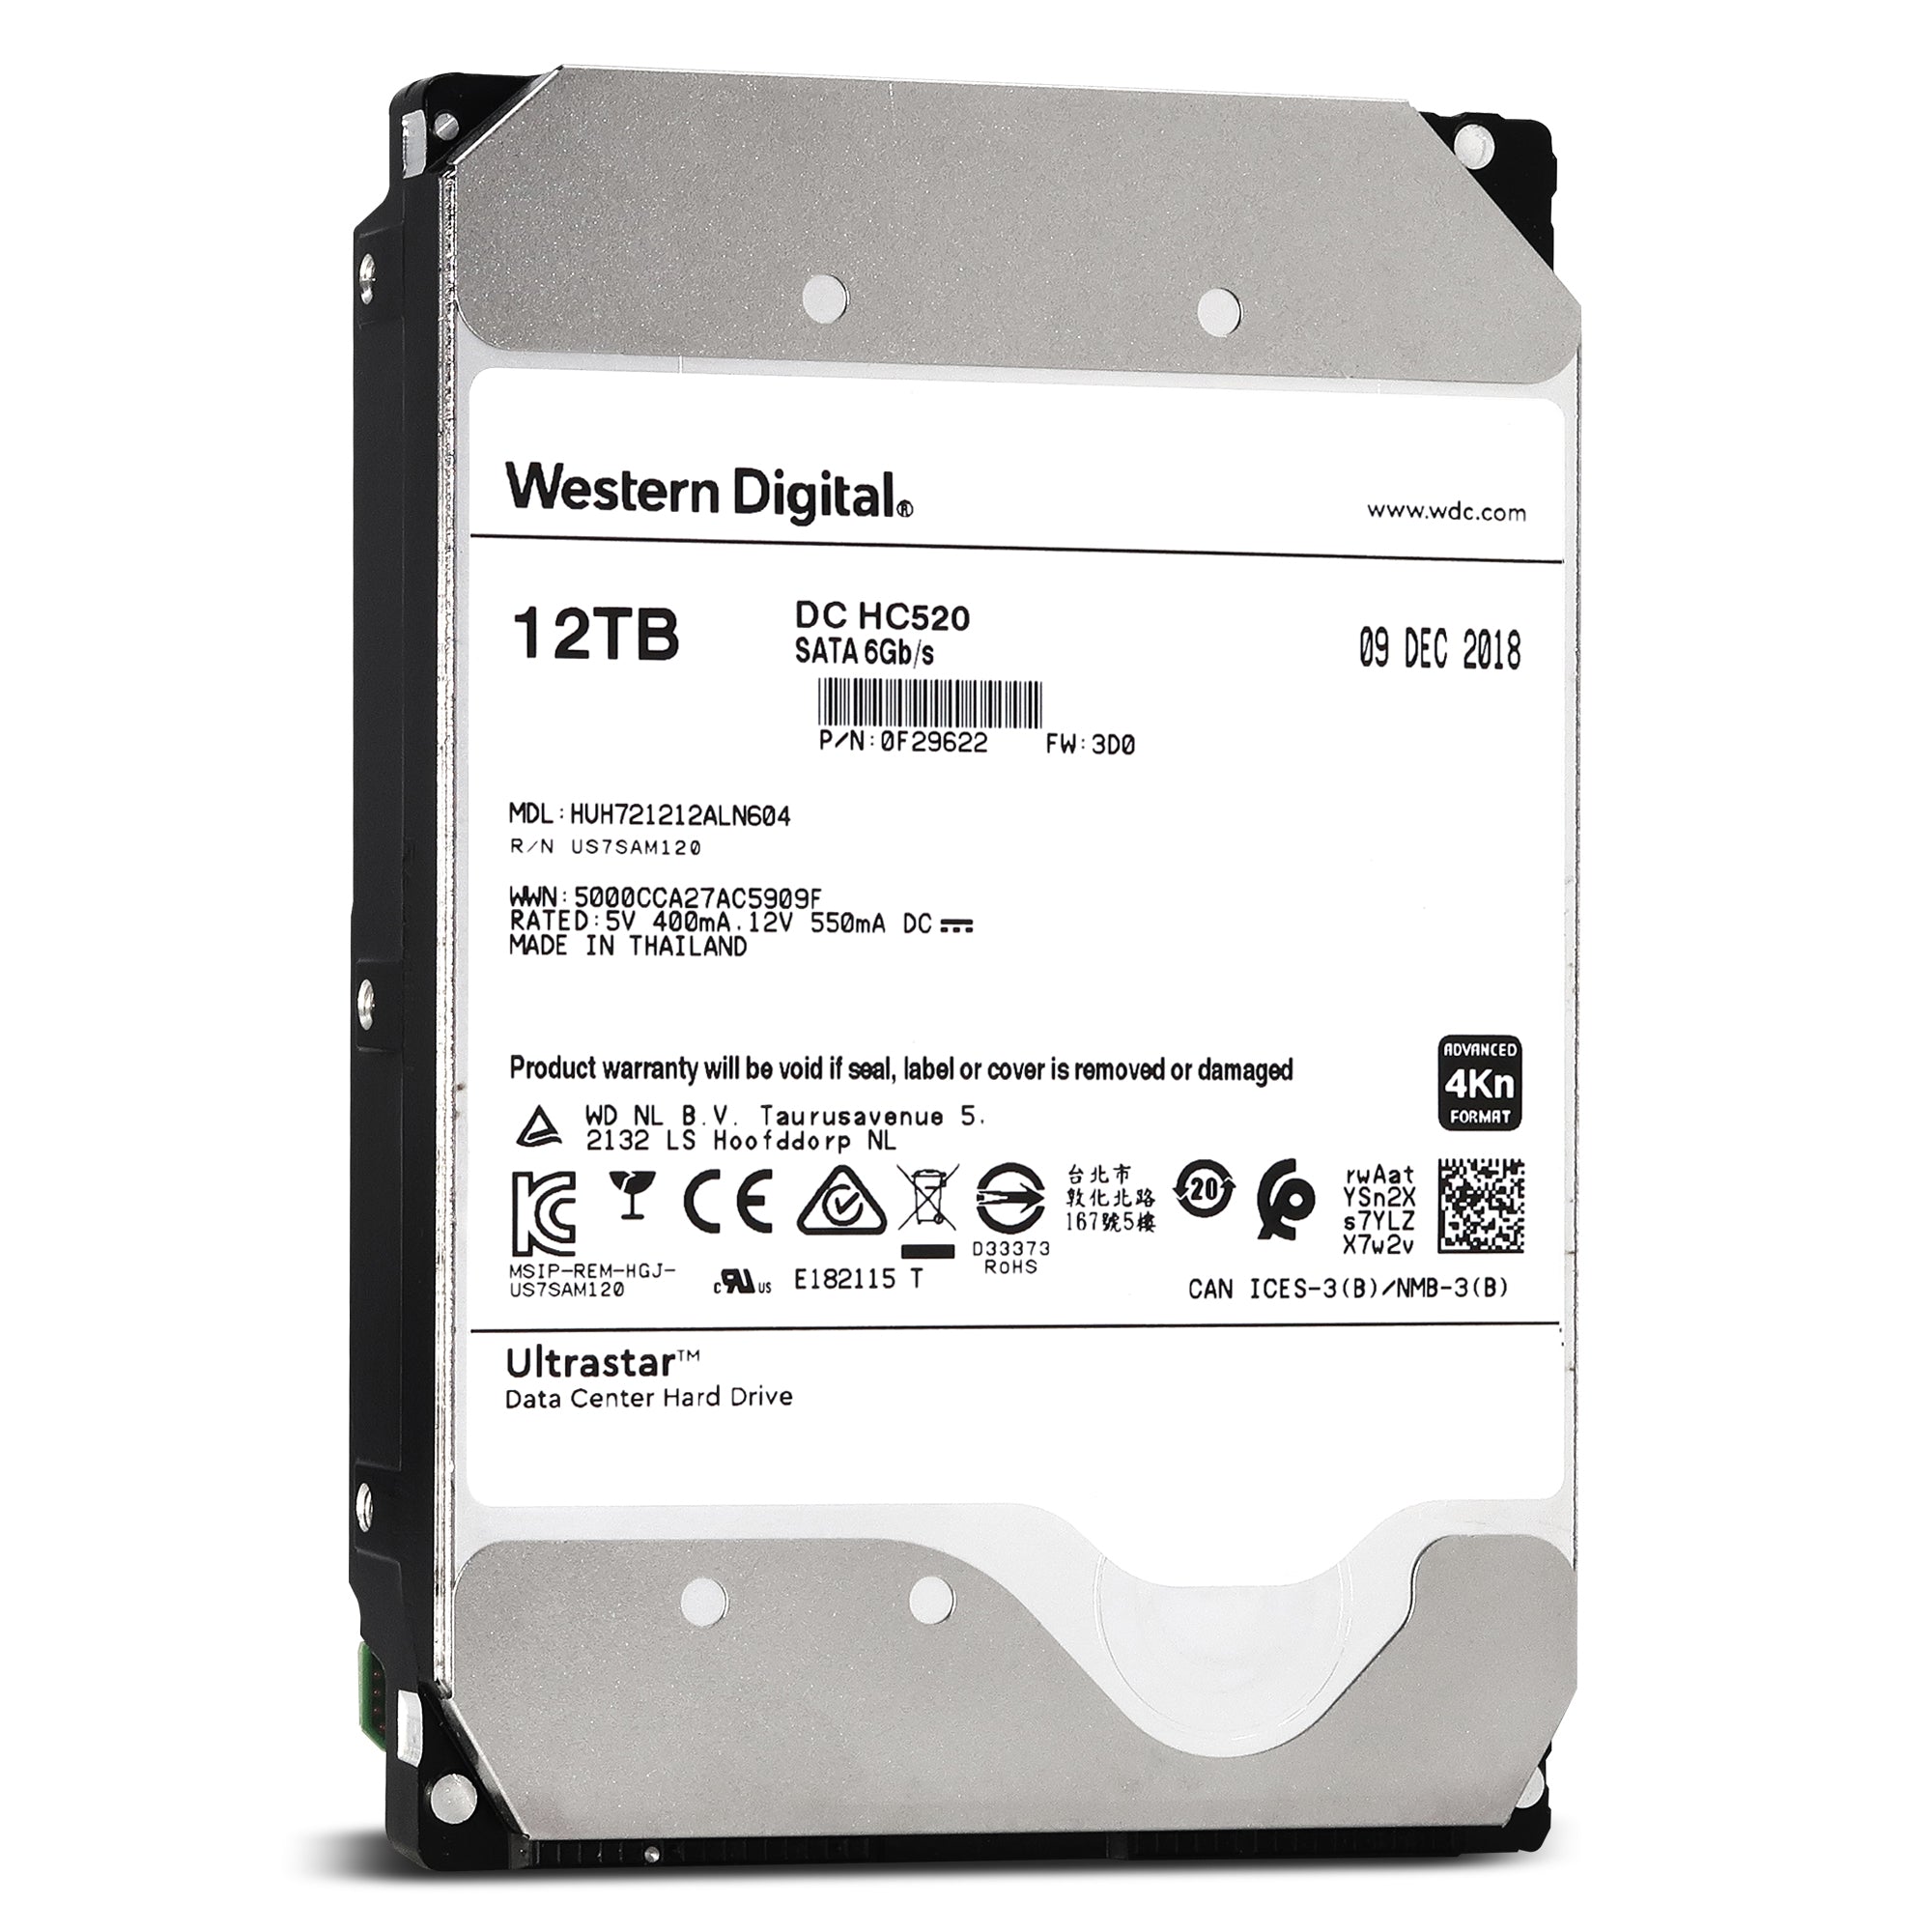 WD Ultrastar HC520 HUH721212ALN604 0F29622 12TB 7.2K RPM SATA 6Gb/s 4Kn 256MB 3.5" SE Power Disable Pin Manufacturer Recertified HDD - Front View